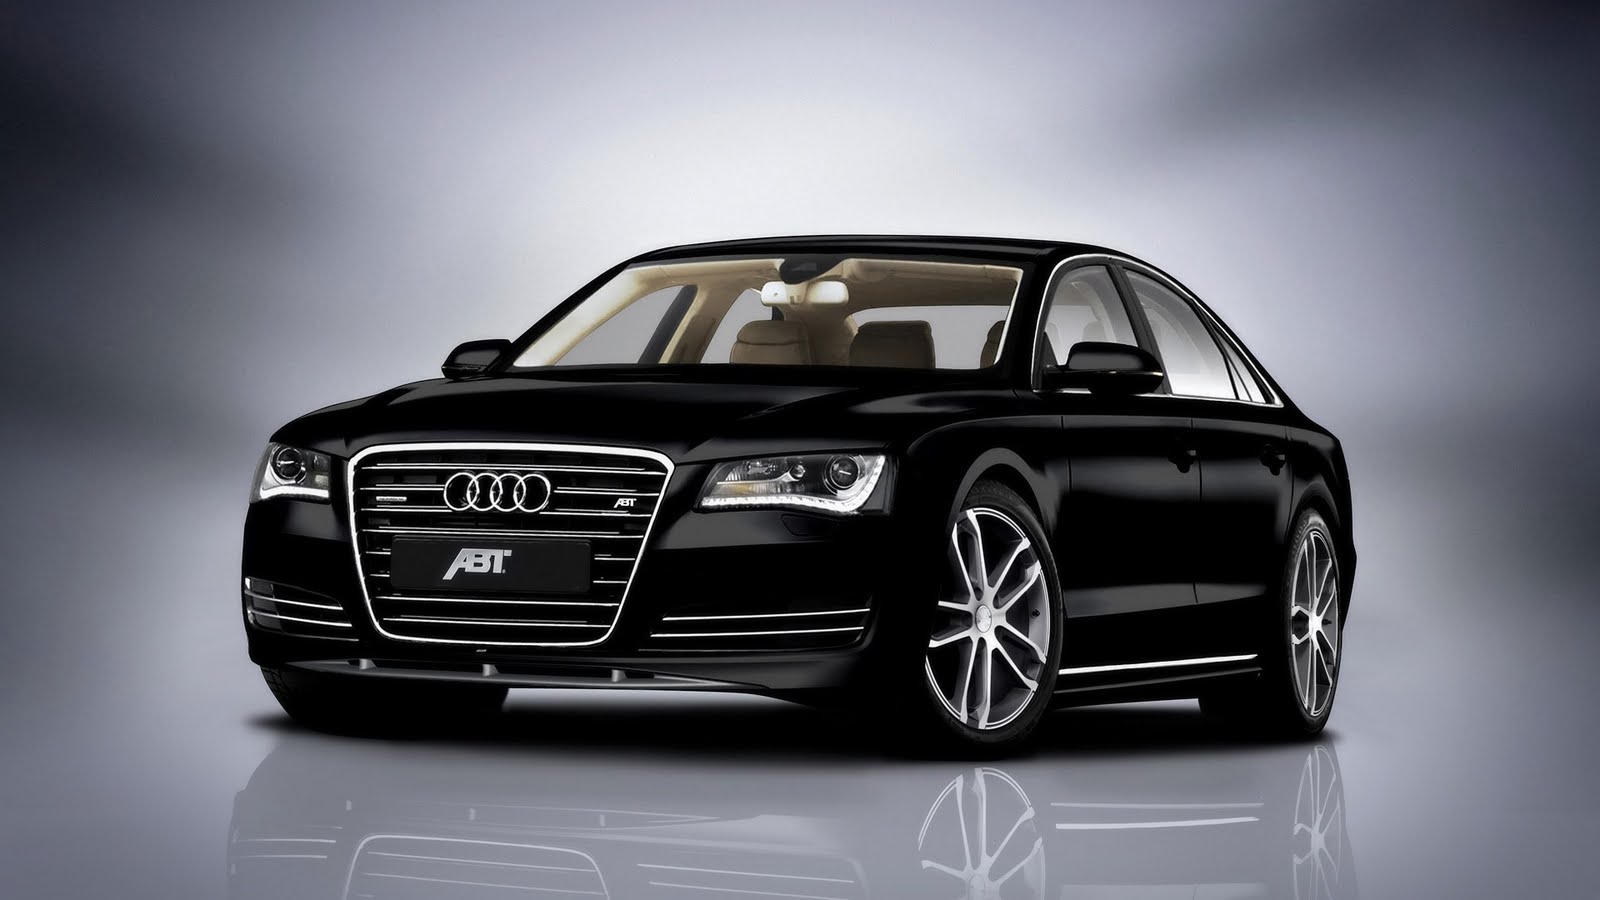 Hd Audi Cars Wallpapers For Pc